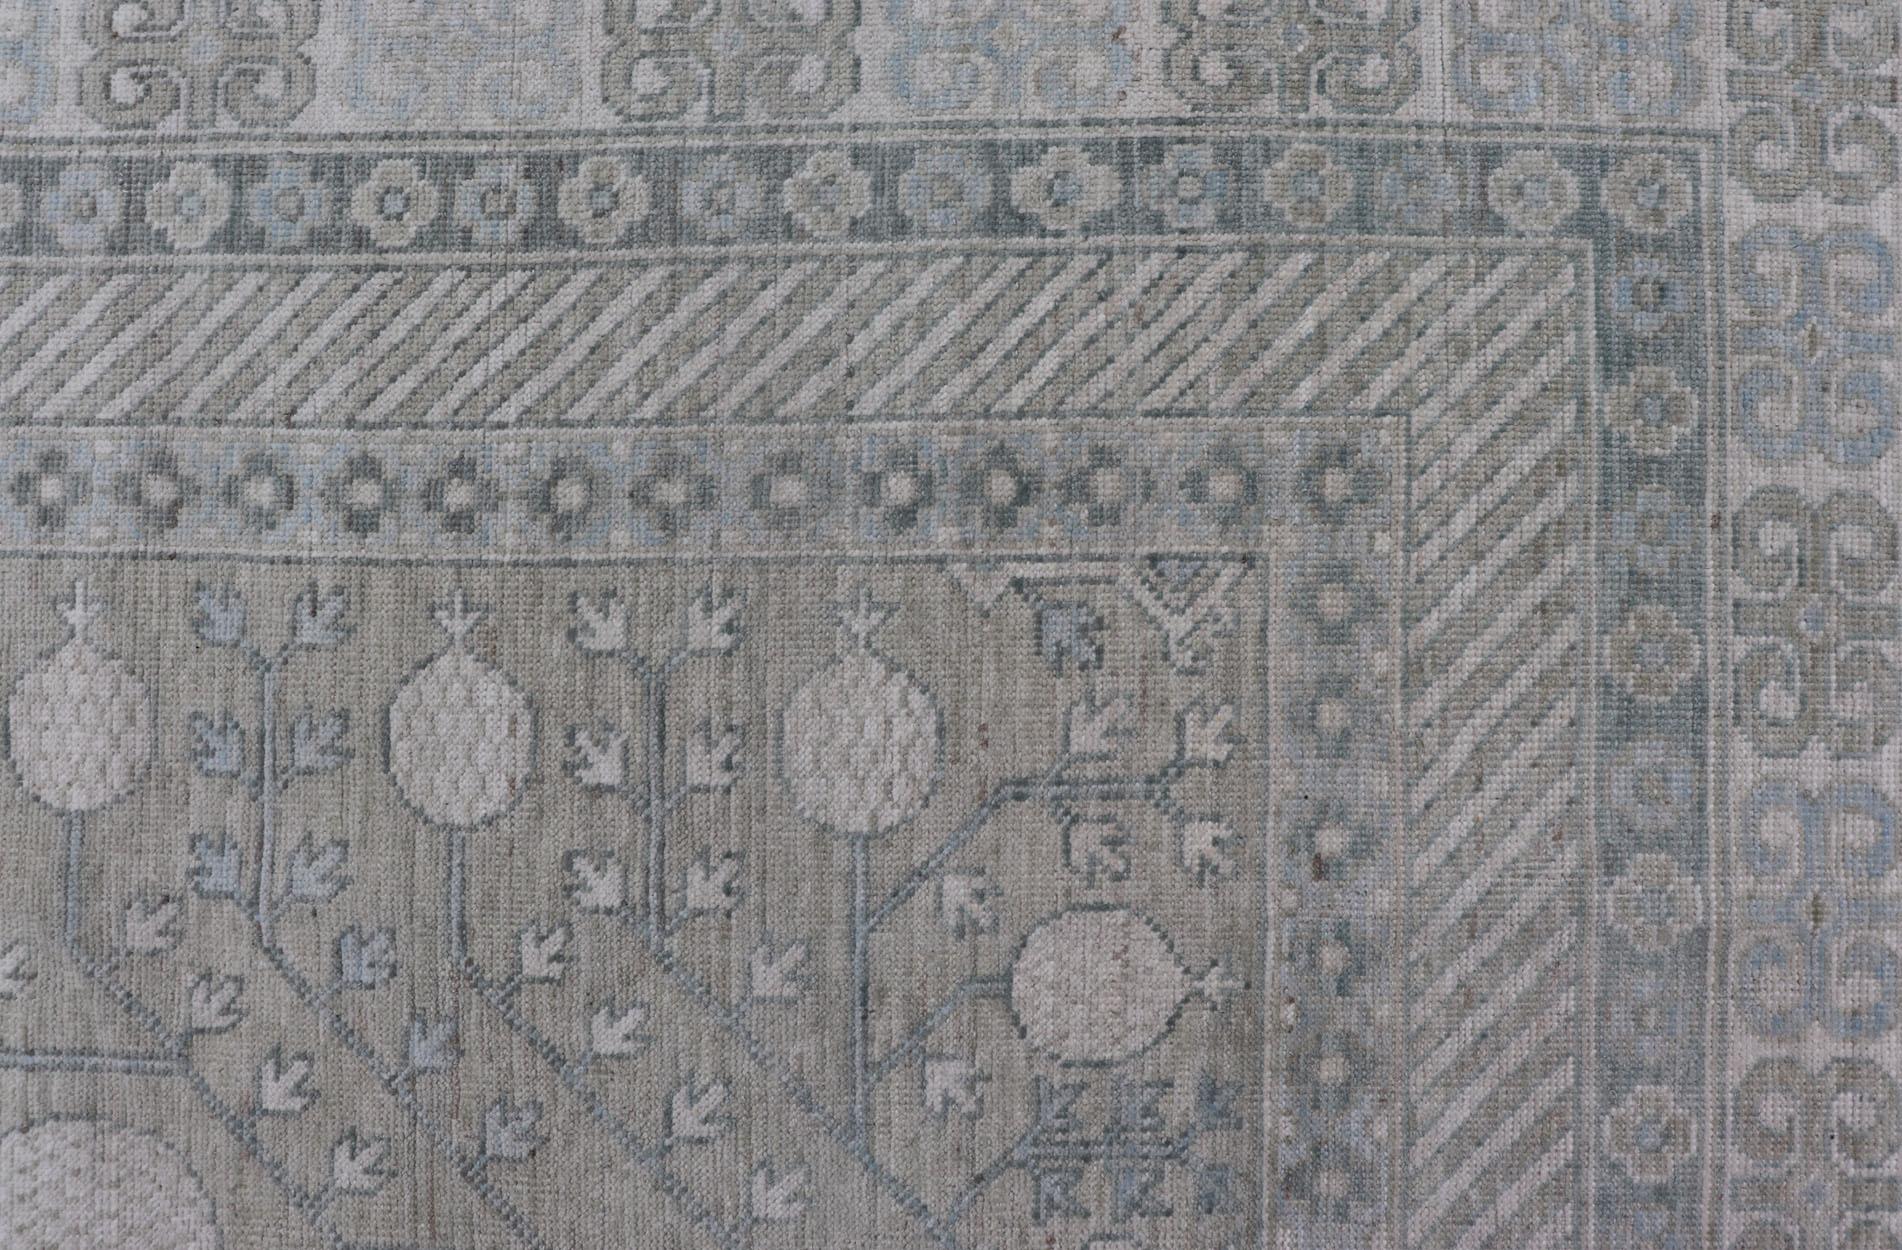 Measures: 8'2 x 10'4 
Modern Tribal Khotan rug in shades of cream. Green, blue, and gray. Keivan Woven Arts Country of origin; Afghanistan Type: Khotan Keivan Woven Arts; rug AWR-15227, early 21st century.

This modern Khotan features a modern muted